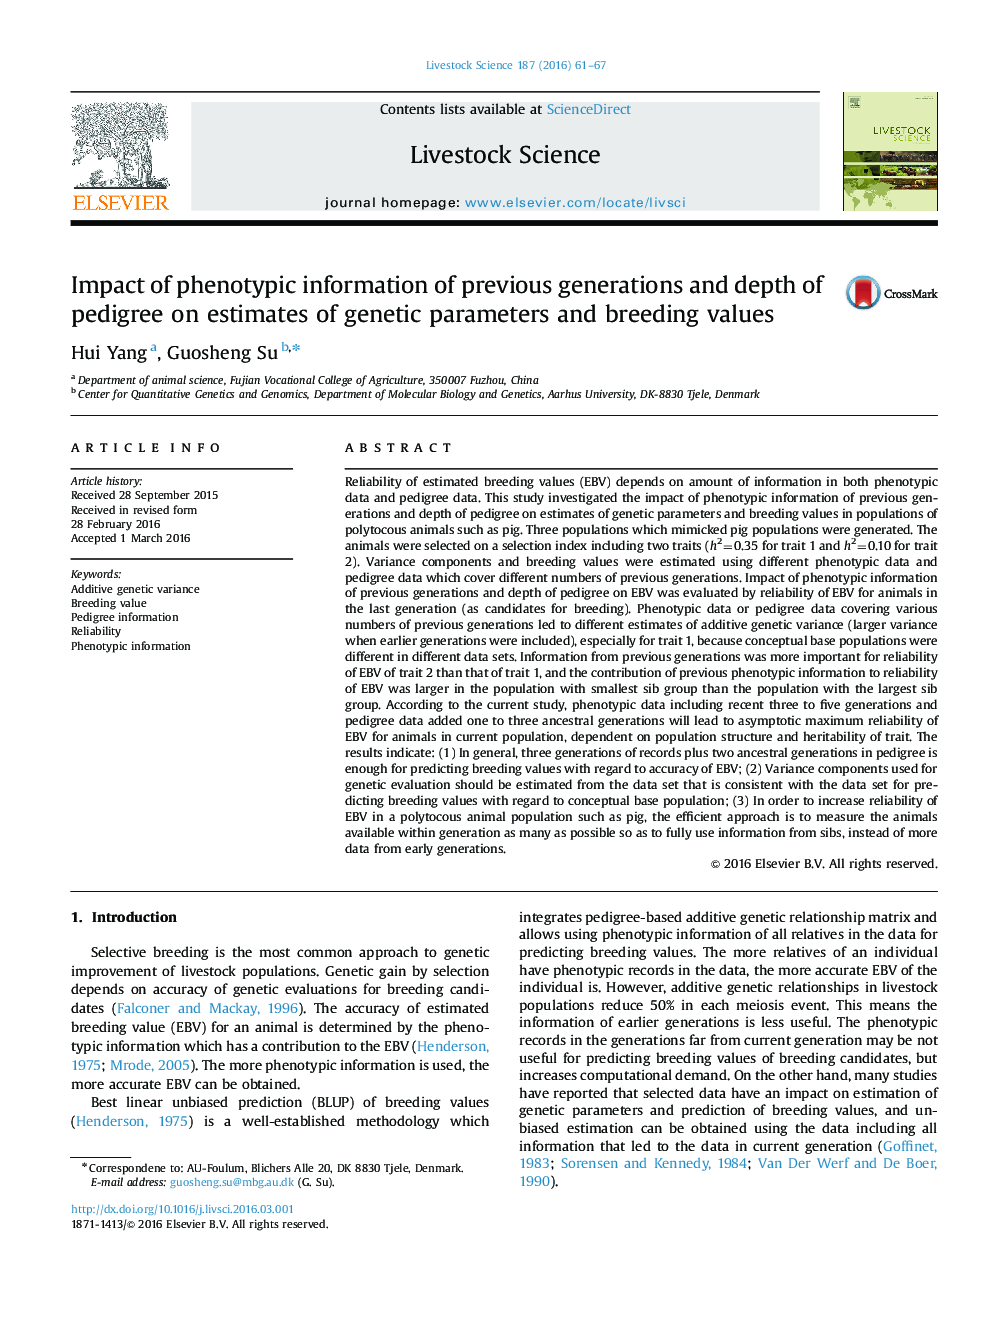 Impact of phenotypic information of previous generations and depth of pedigree on estimates of genetic parameters and breeding values